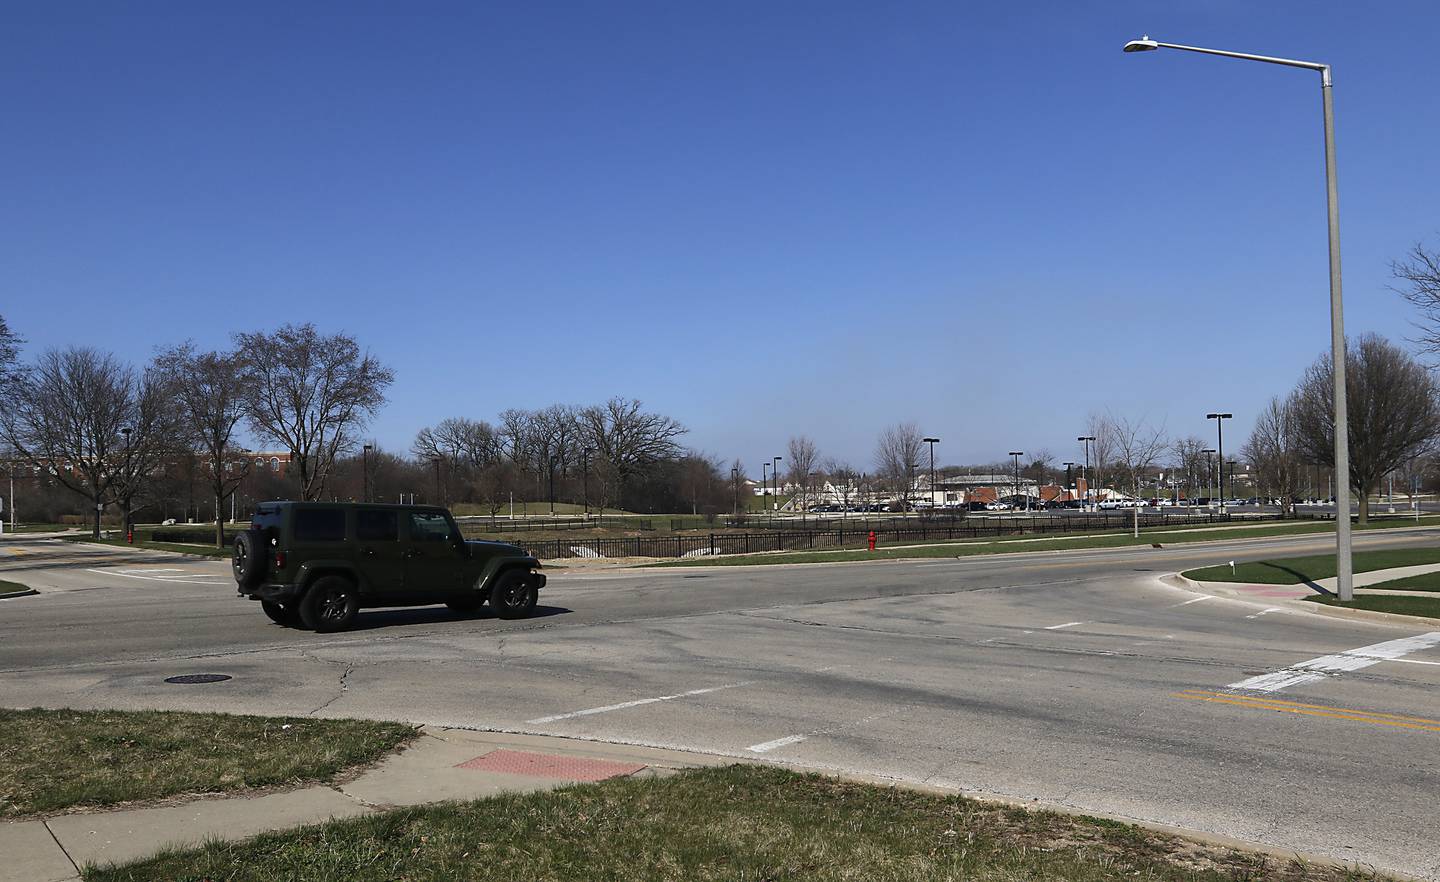 The intersection of Congress Parkway and Exchange Drive in Crystal Lake on Monday, April 10, 2023. This intersection and the intersection of Federal Drive and Congress Parkway are on track to be changed into roundabouts this summer construction season.